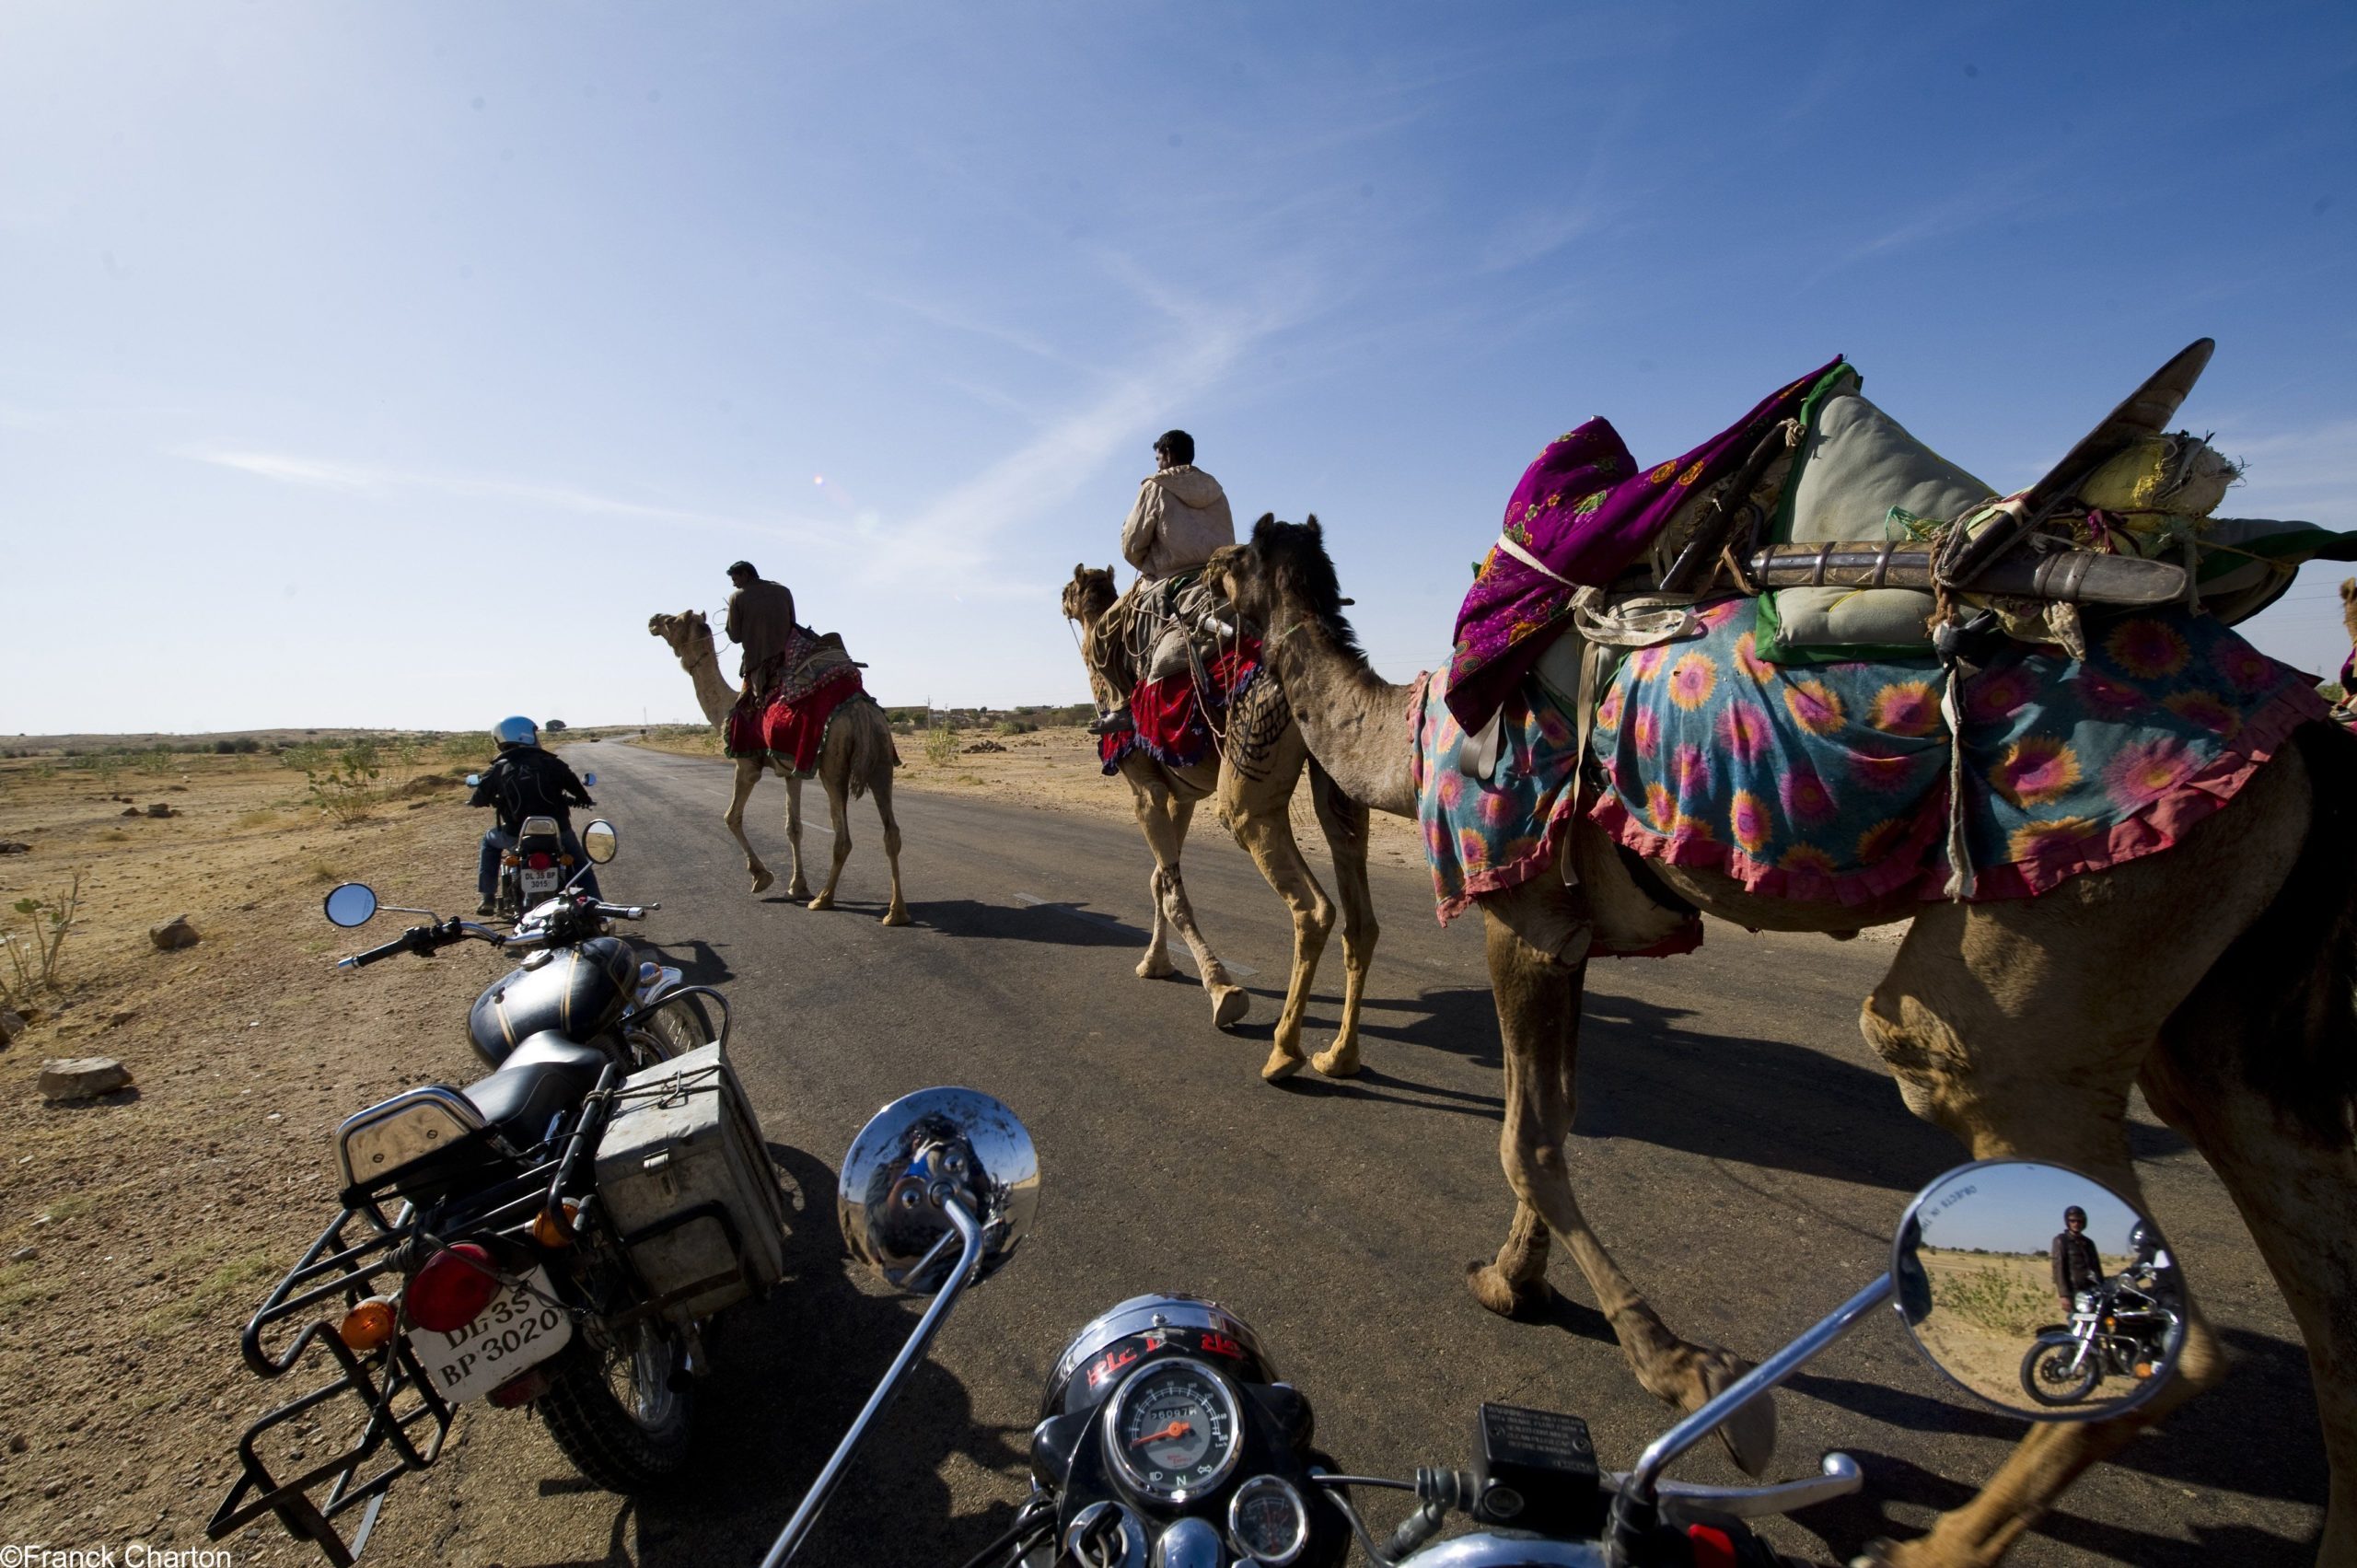 Motorcycle road trip India / North India - The Land of Maharajas